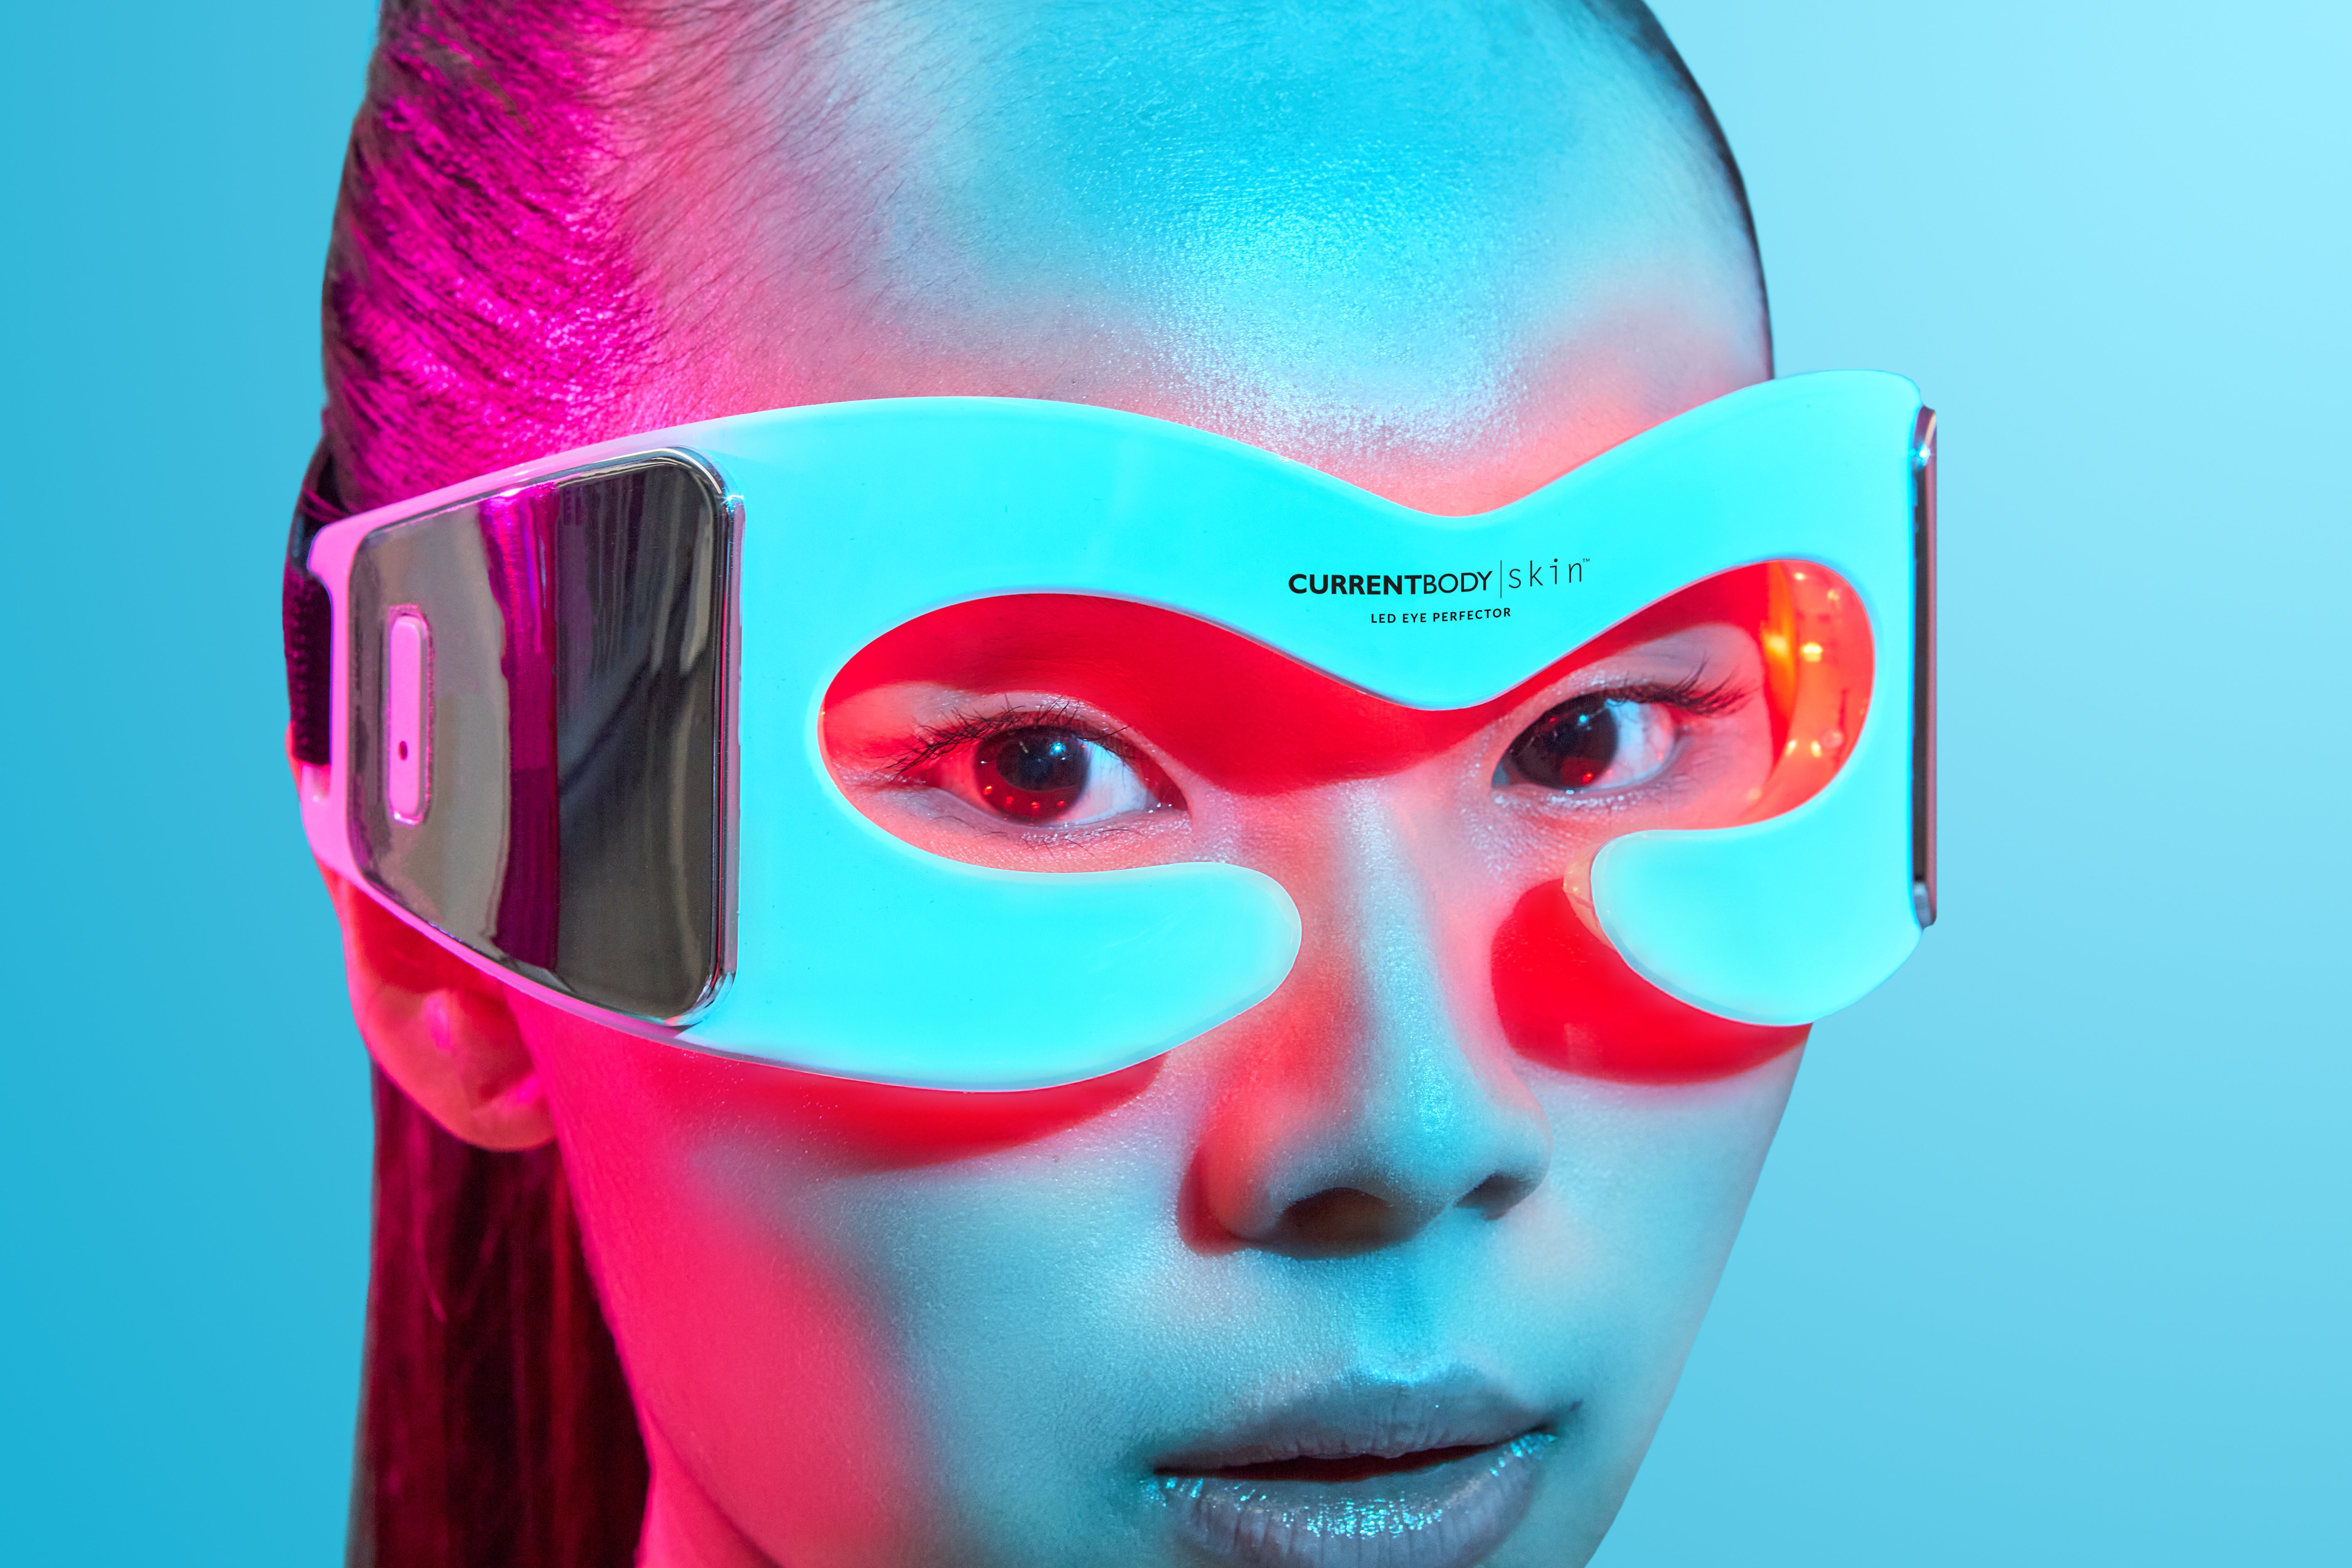 Rejuvenation awaits with CurrentBody's new LED mask for your eyes